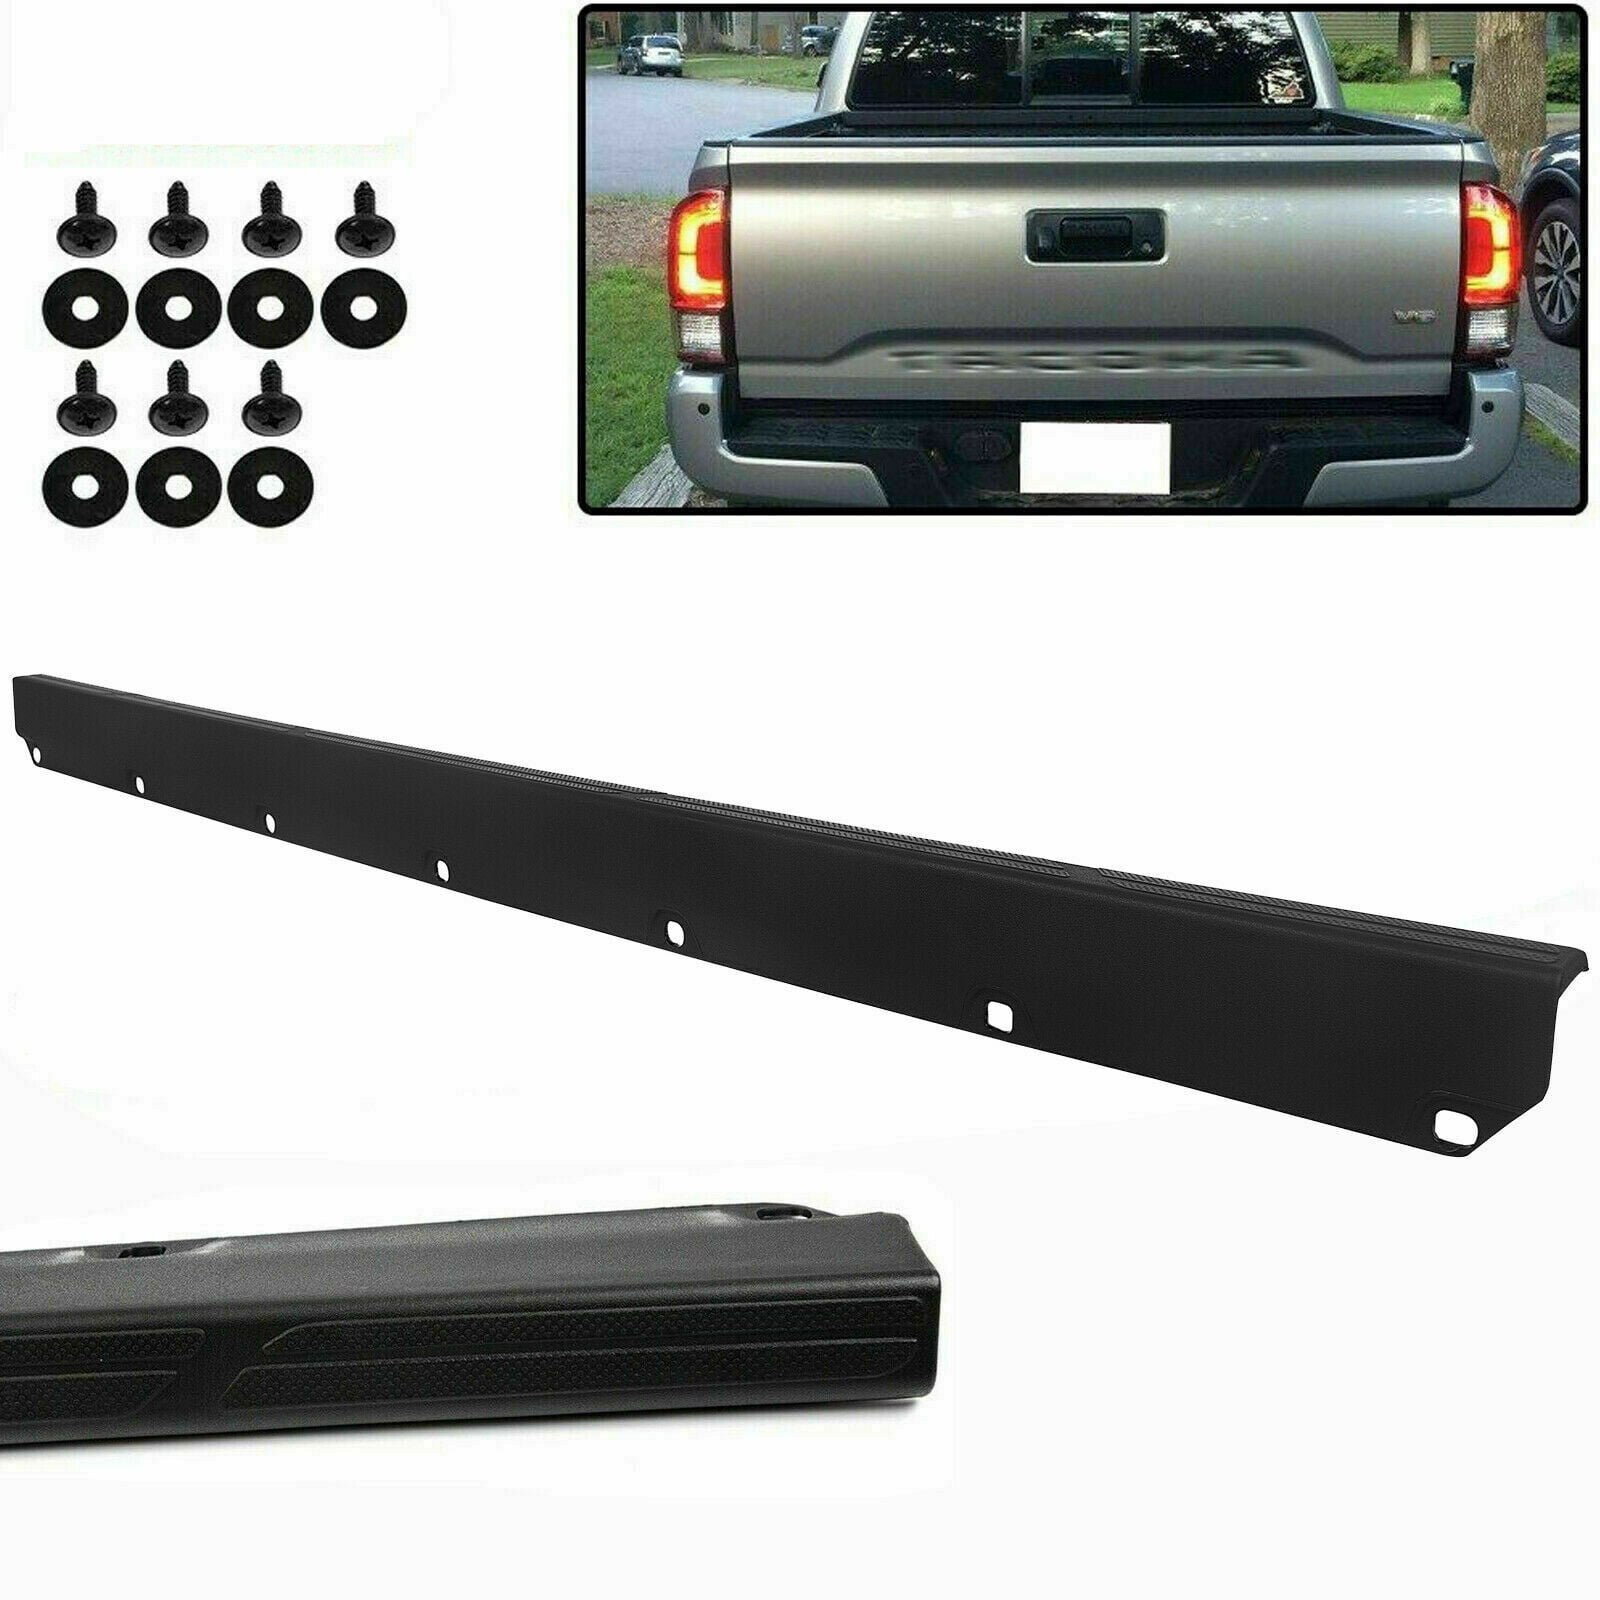 Replacement Tailgate Molding Cap for 2005-2015 Toyota Tacoma TO1904100 2005, 2007, 2008, 2009, 2010, 2011, 2012, 2013, 2014, 2015 